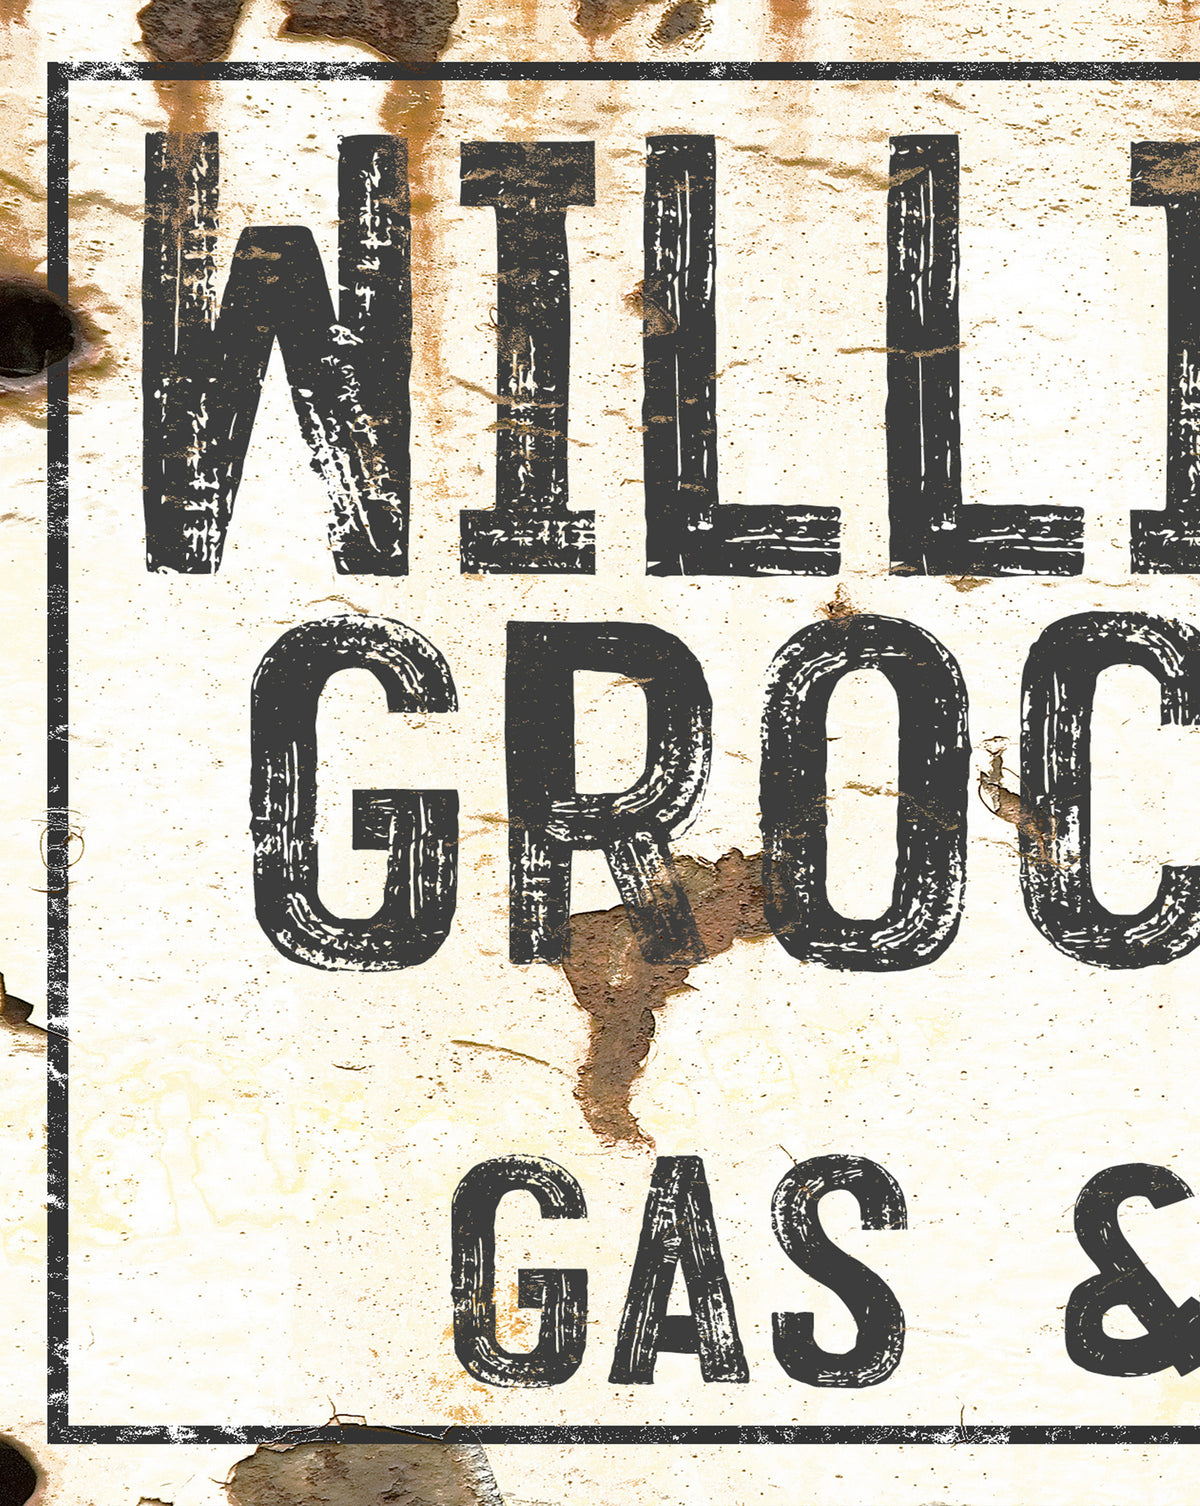 Personalized Williams Grocery Gas & Oil Wall Art - Modern Farmhouse Decor Canvas Prints